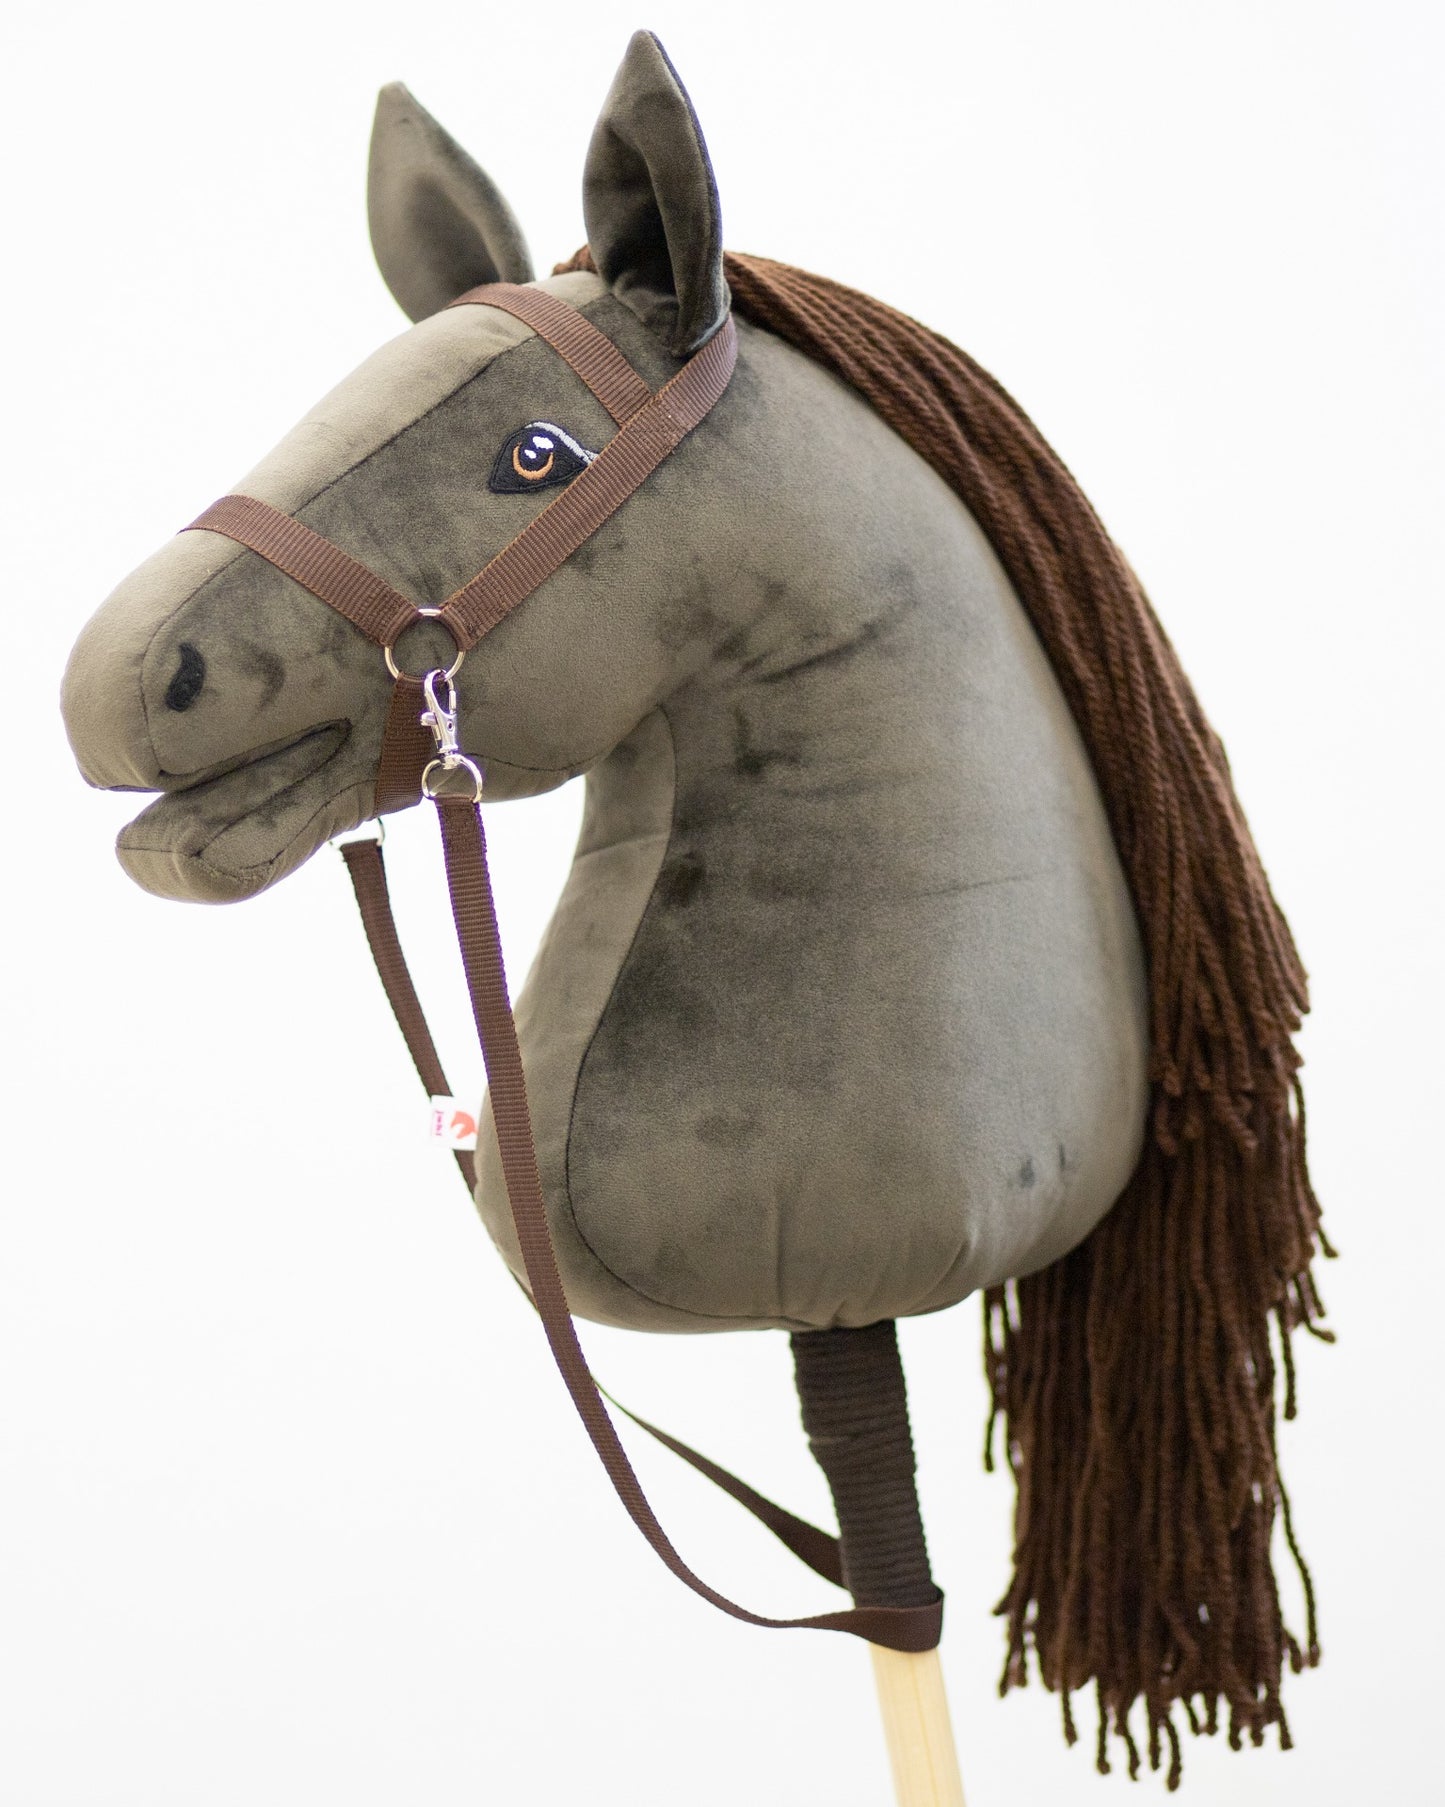 Gizmo - Brown mane - Adult horse